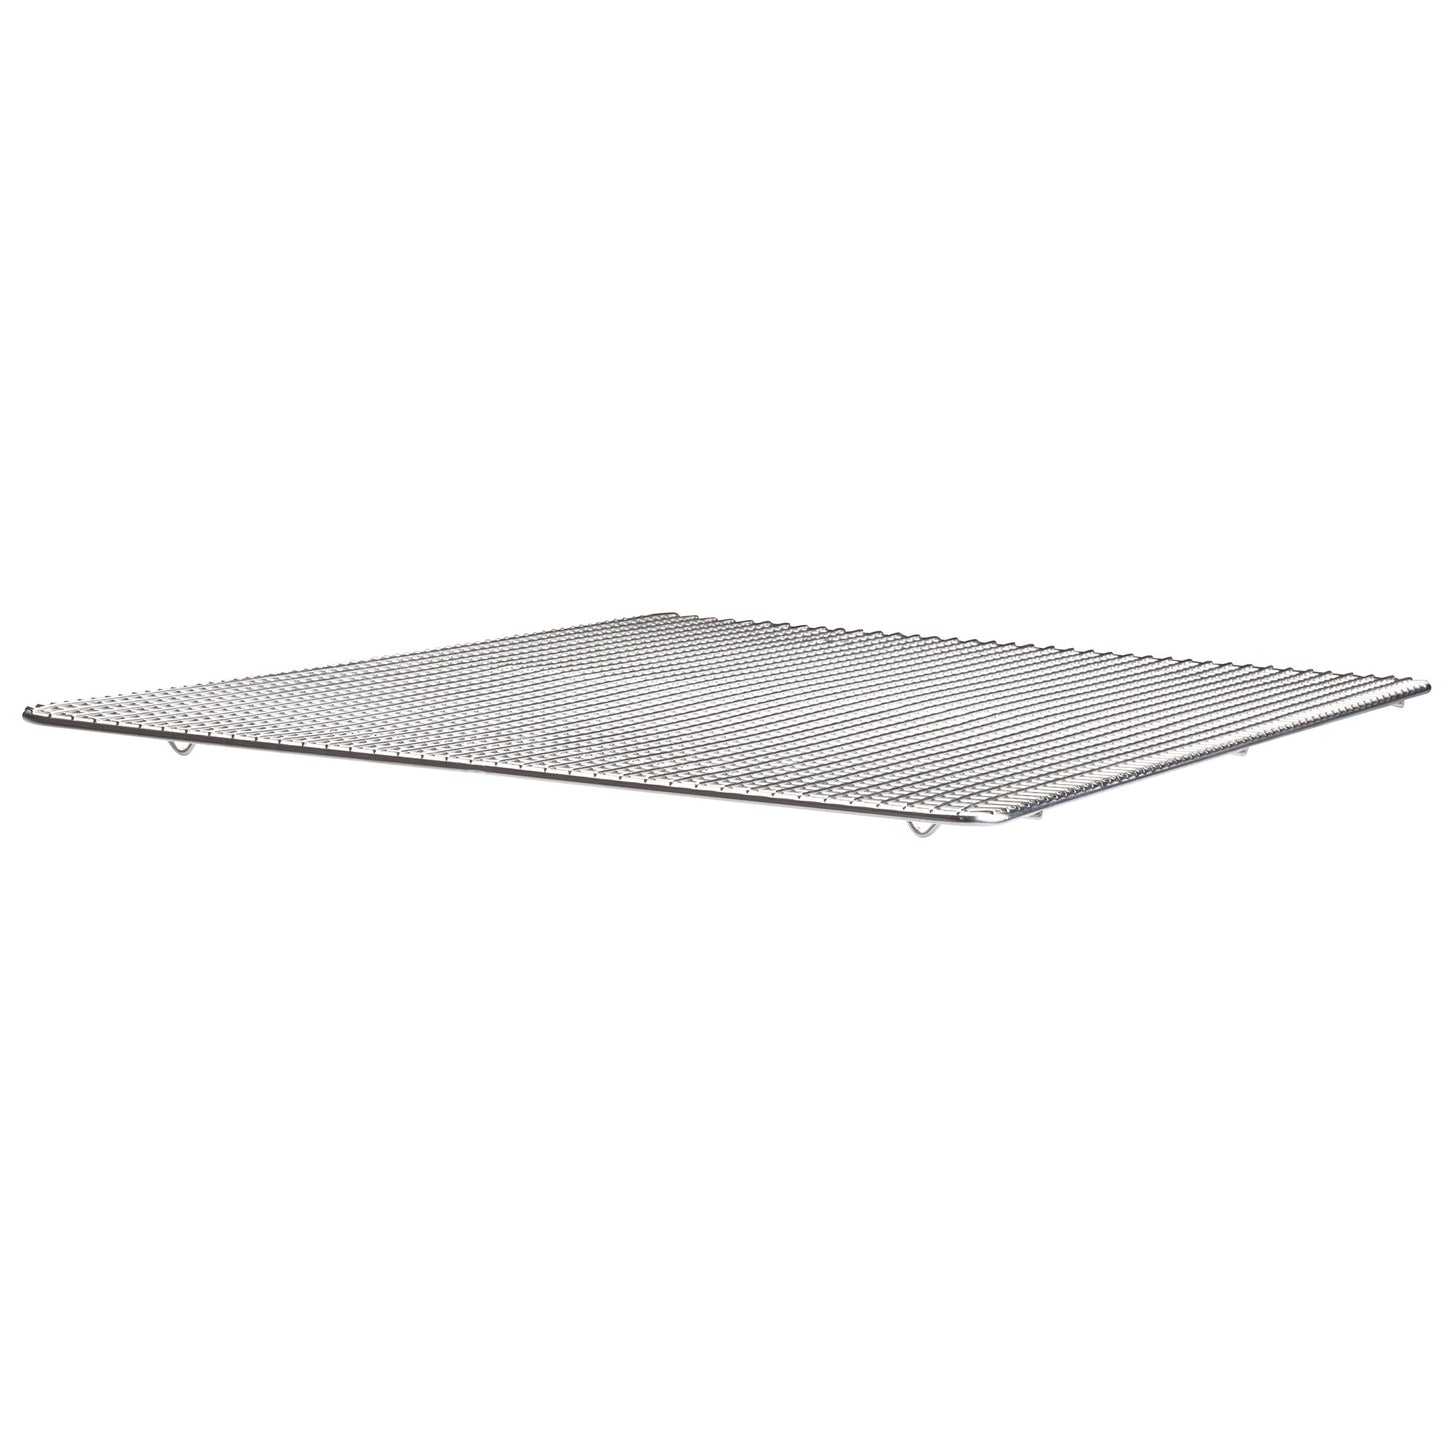 PGWS-2416 - Wire Sheet Pan Grate, Stainless Steel - Full